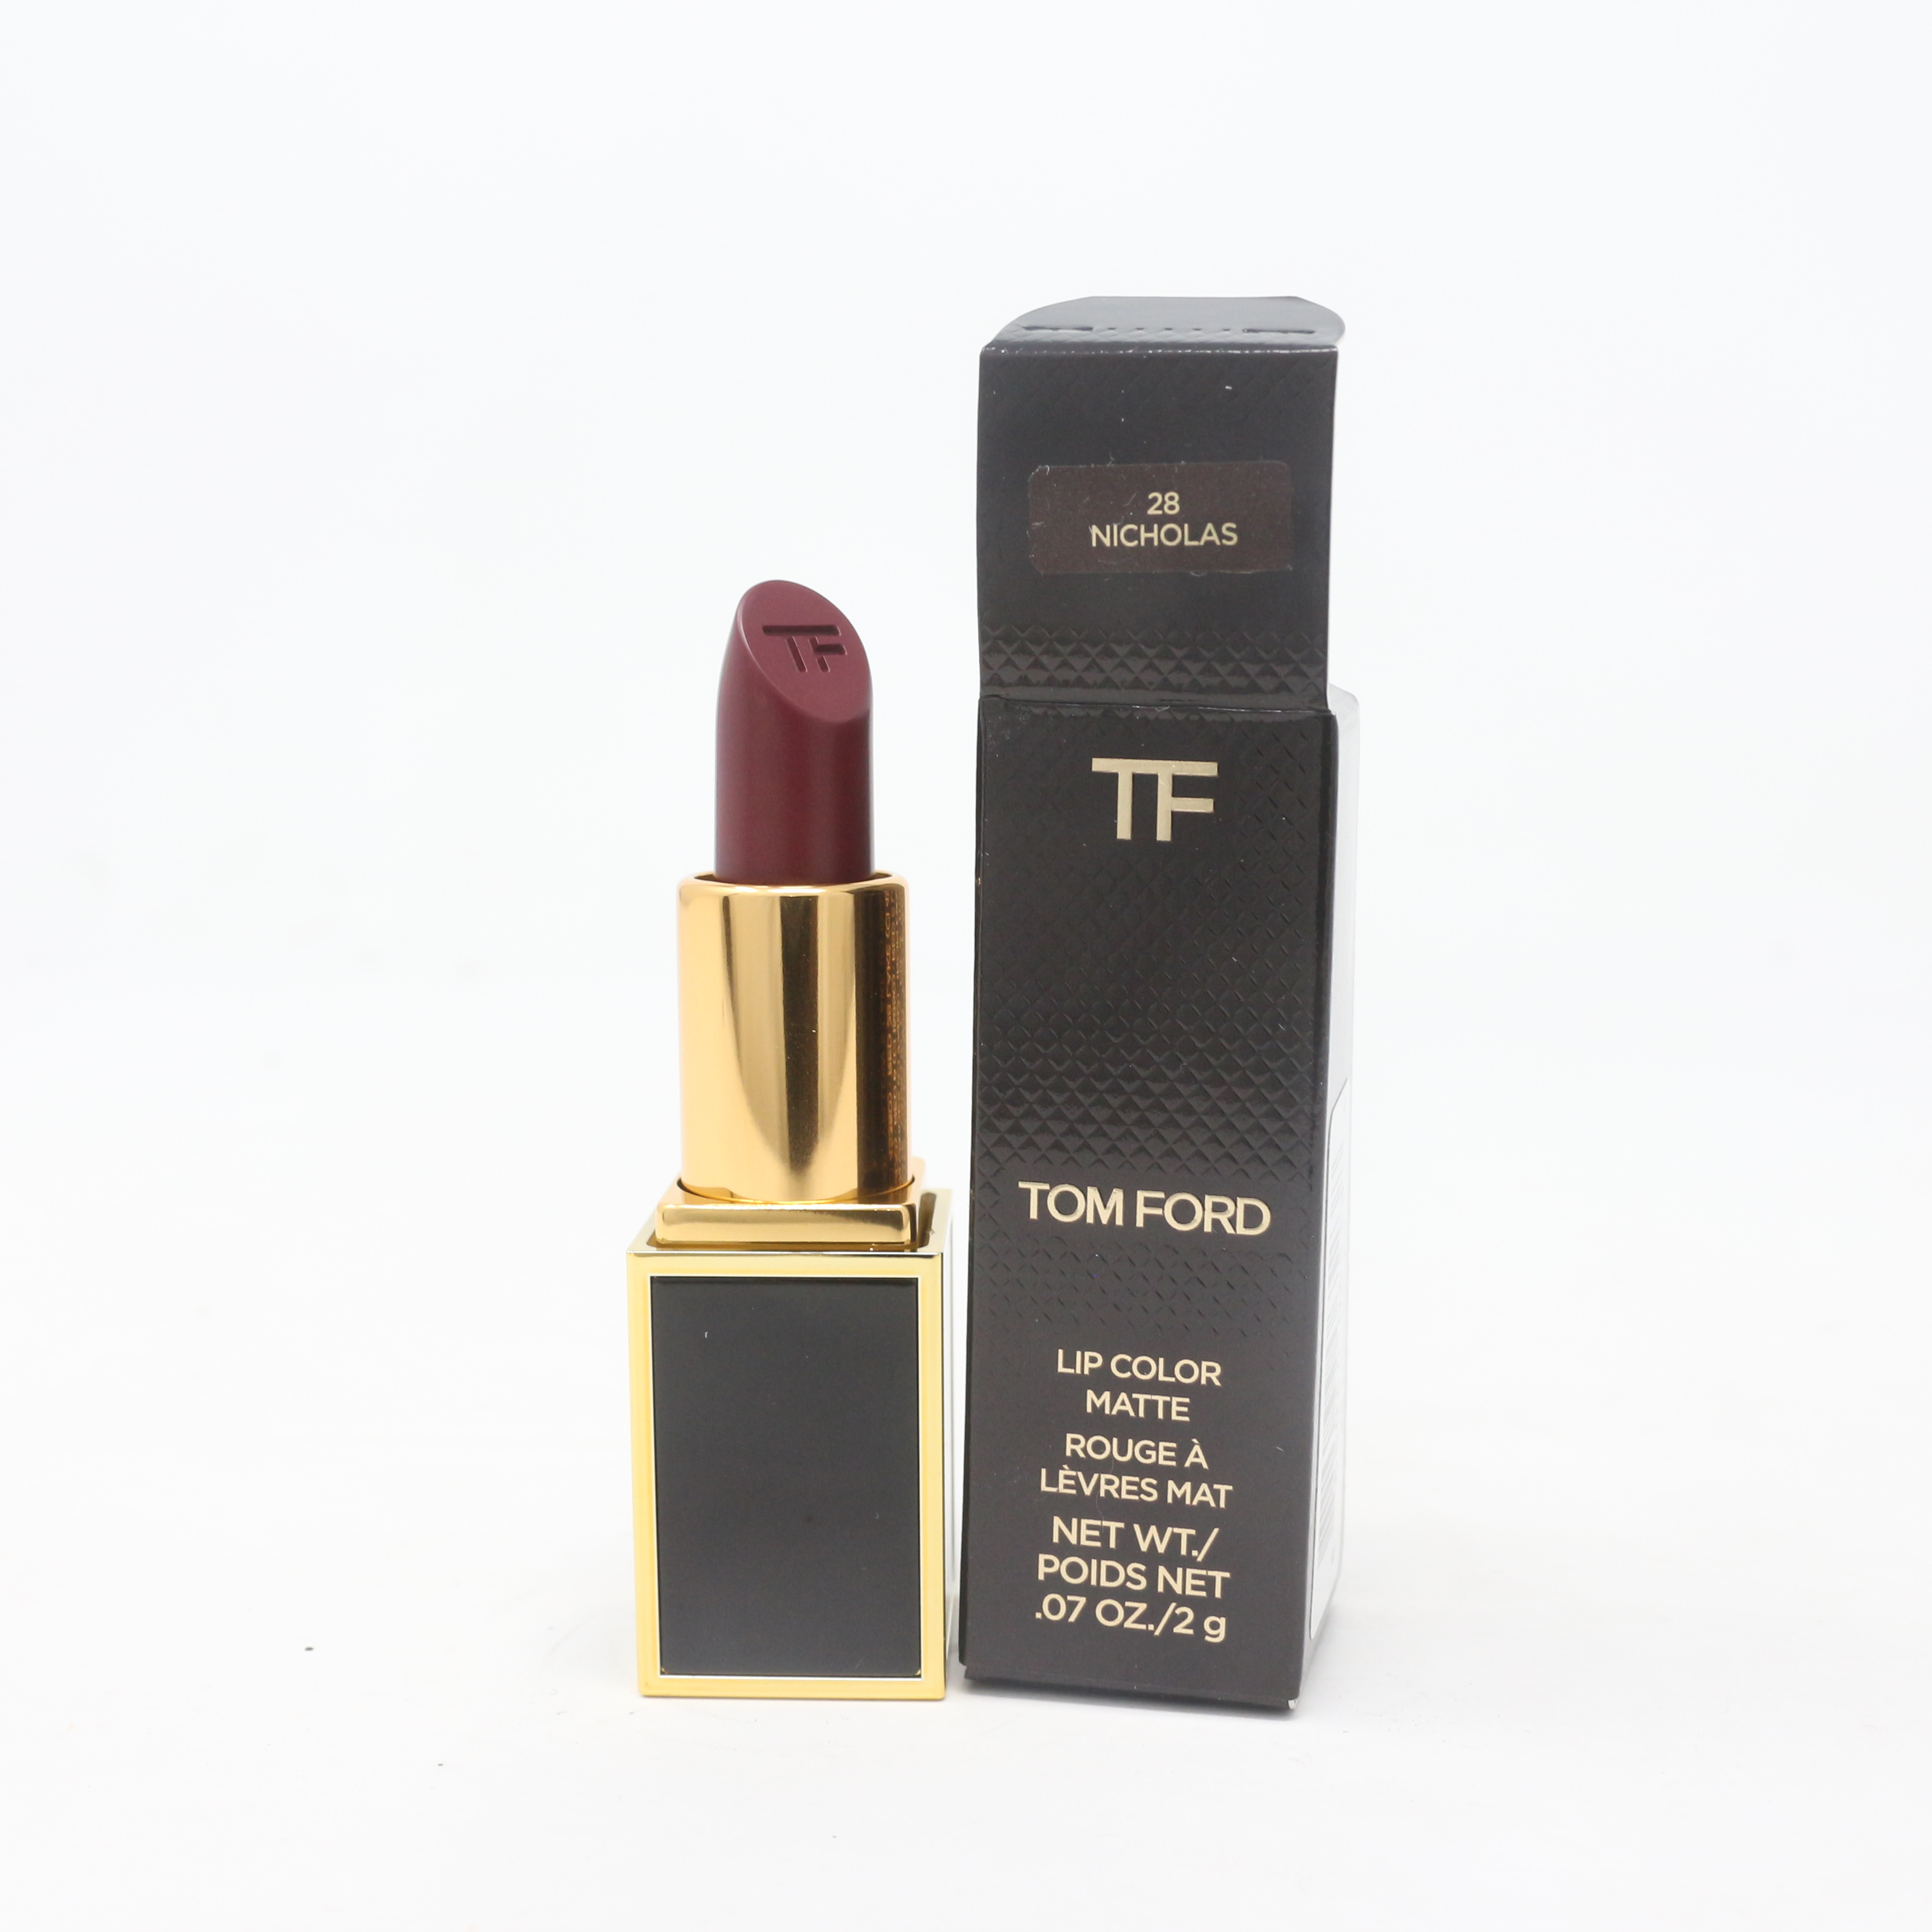 Tom Ford 'Lip Color' Rouge a Levres /2g New In Box | eBay